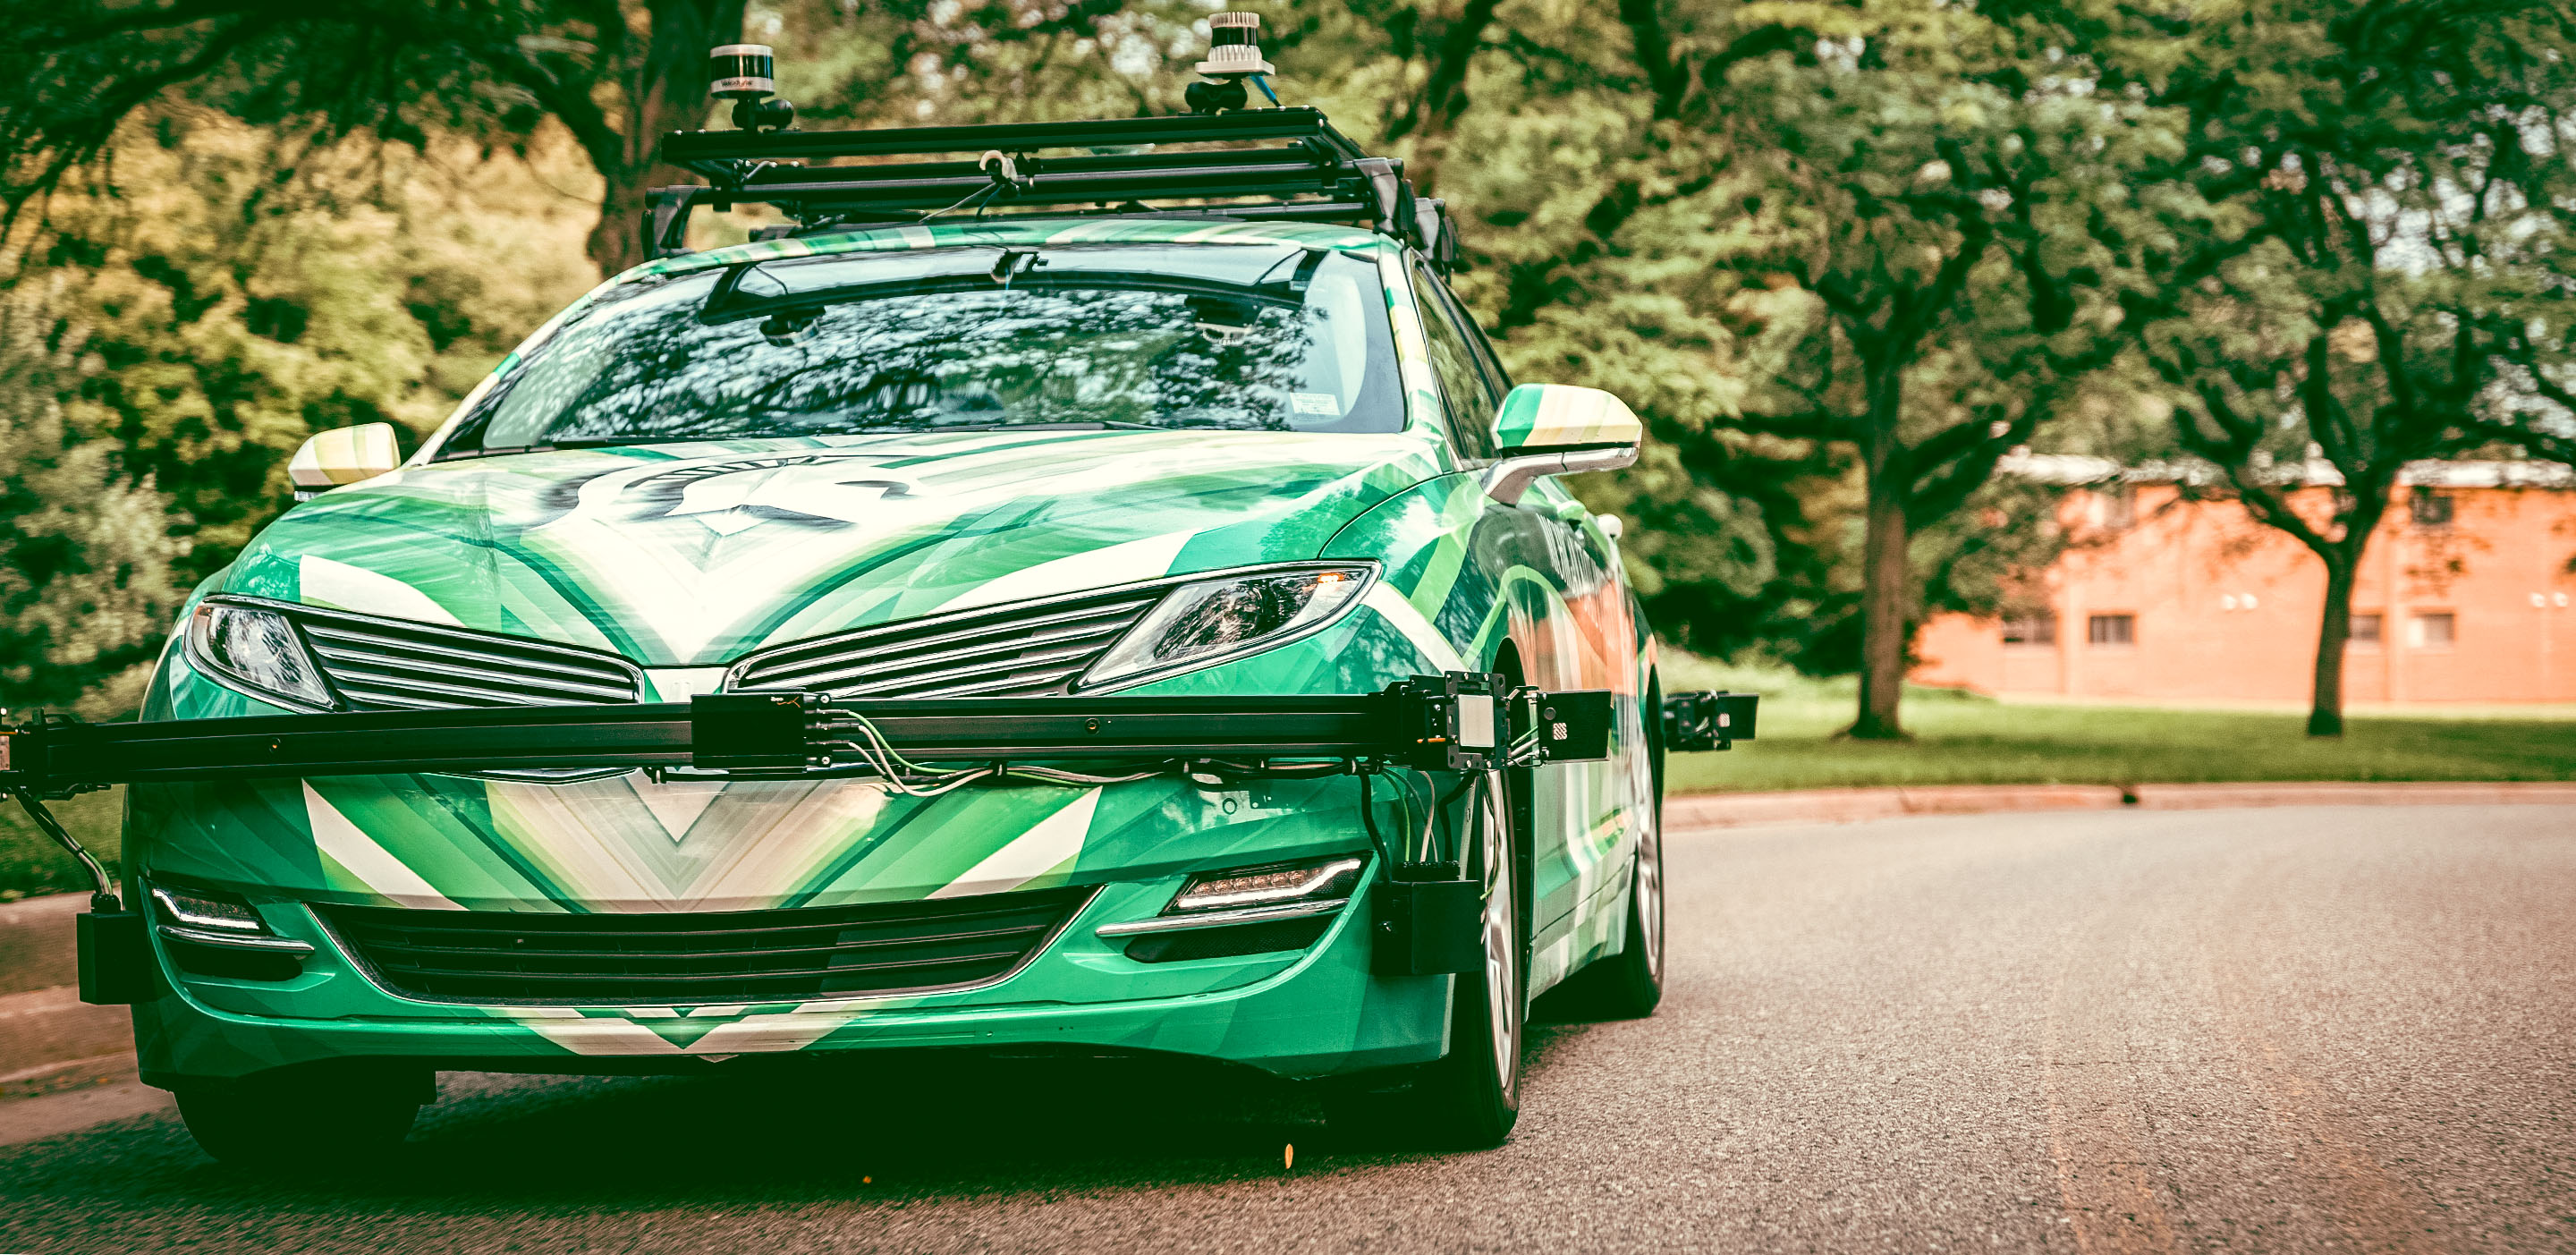 Spartans in the driver’s seat: The future of autonomous vehicles